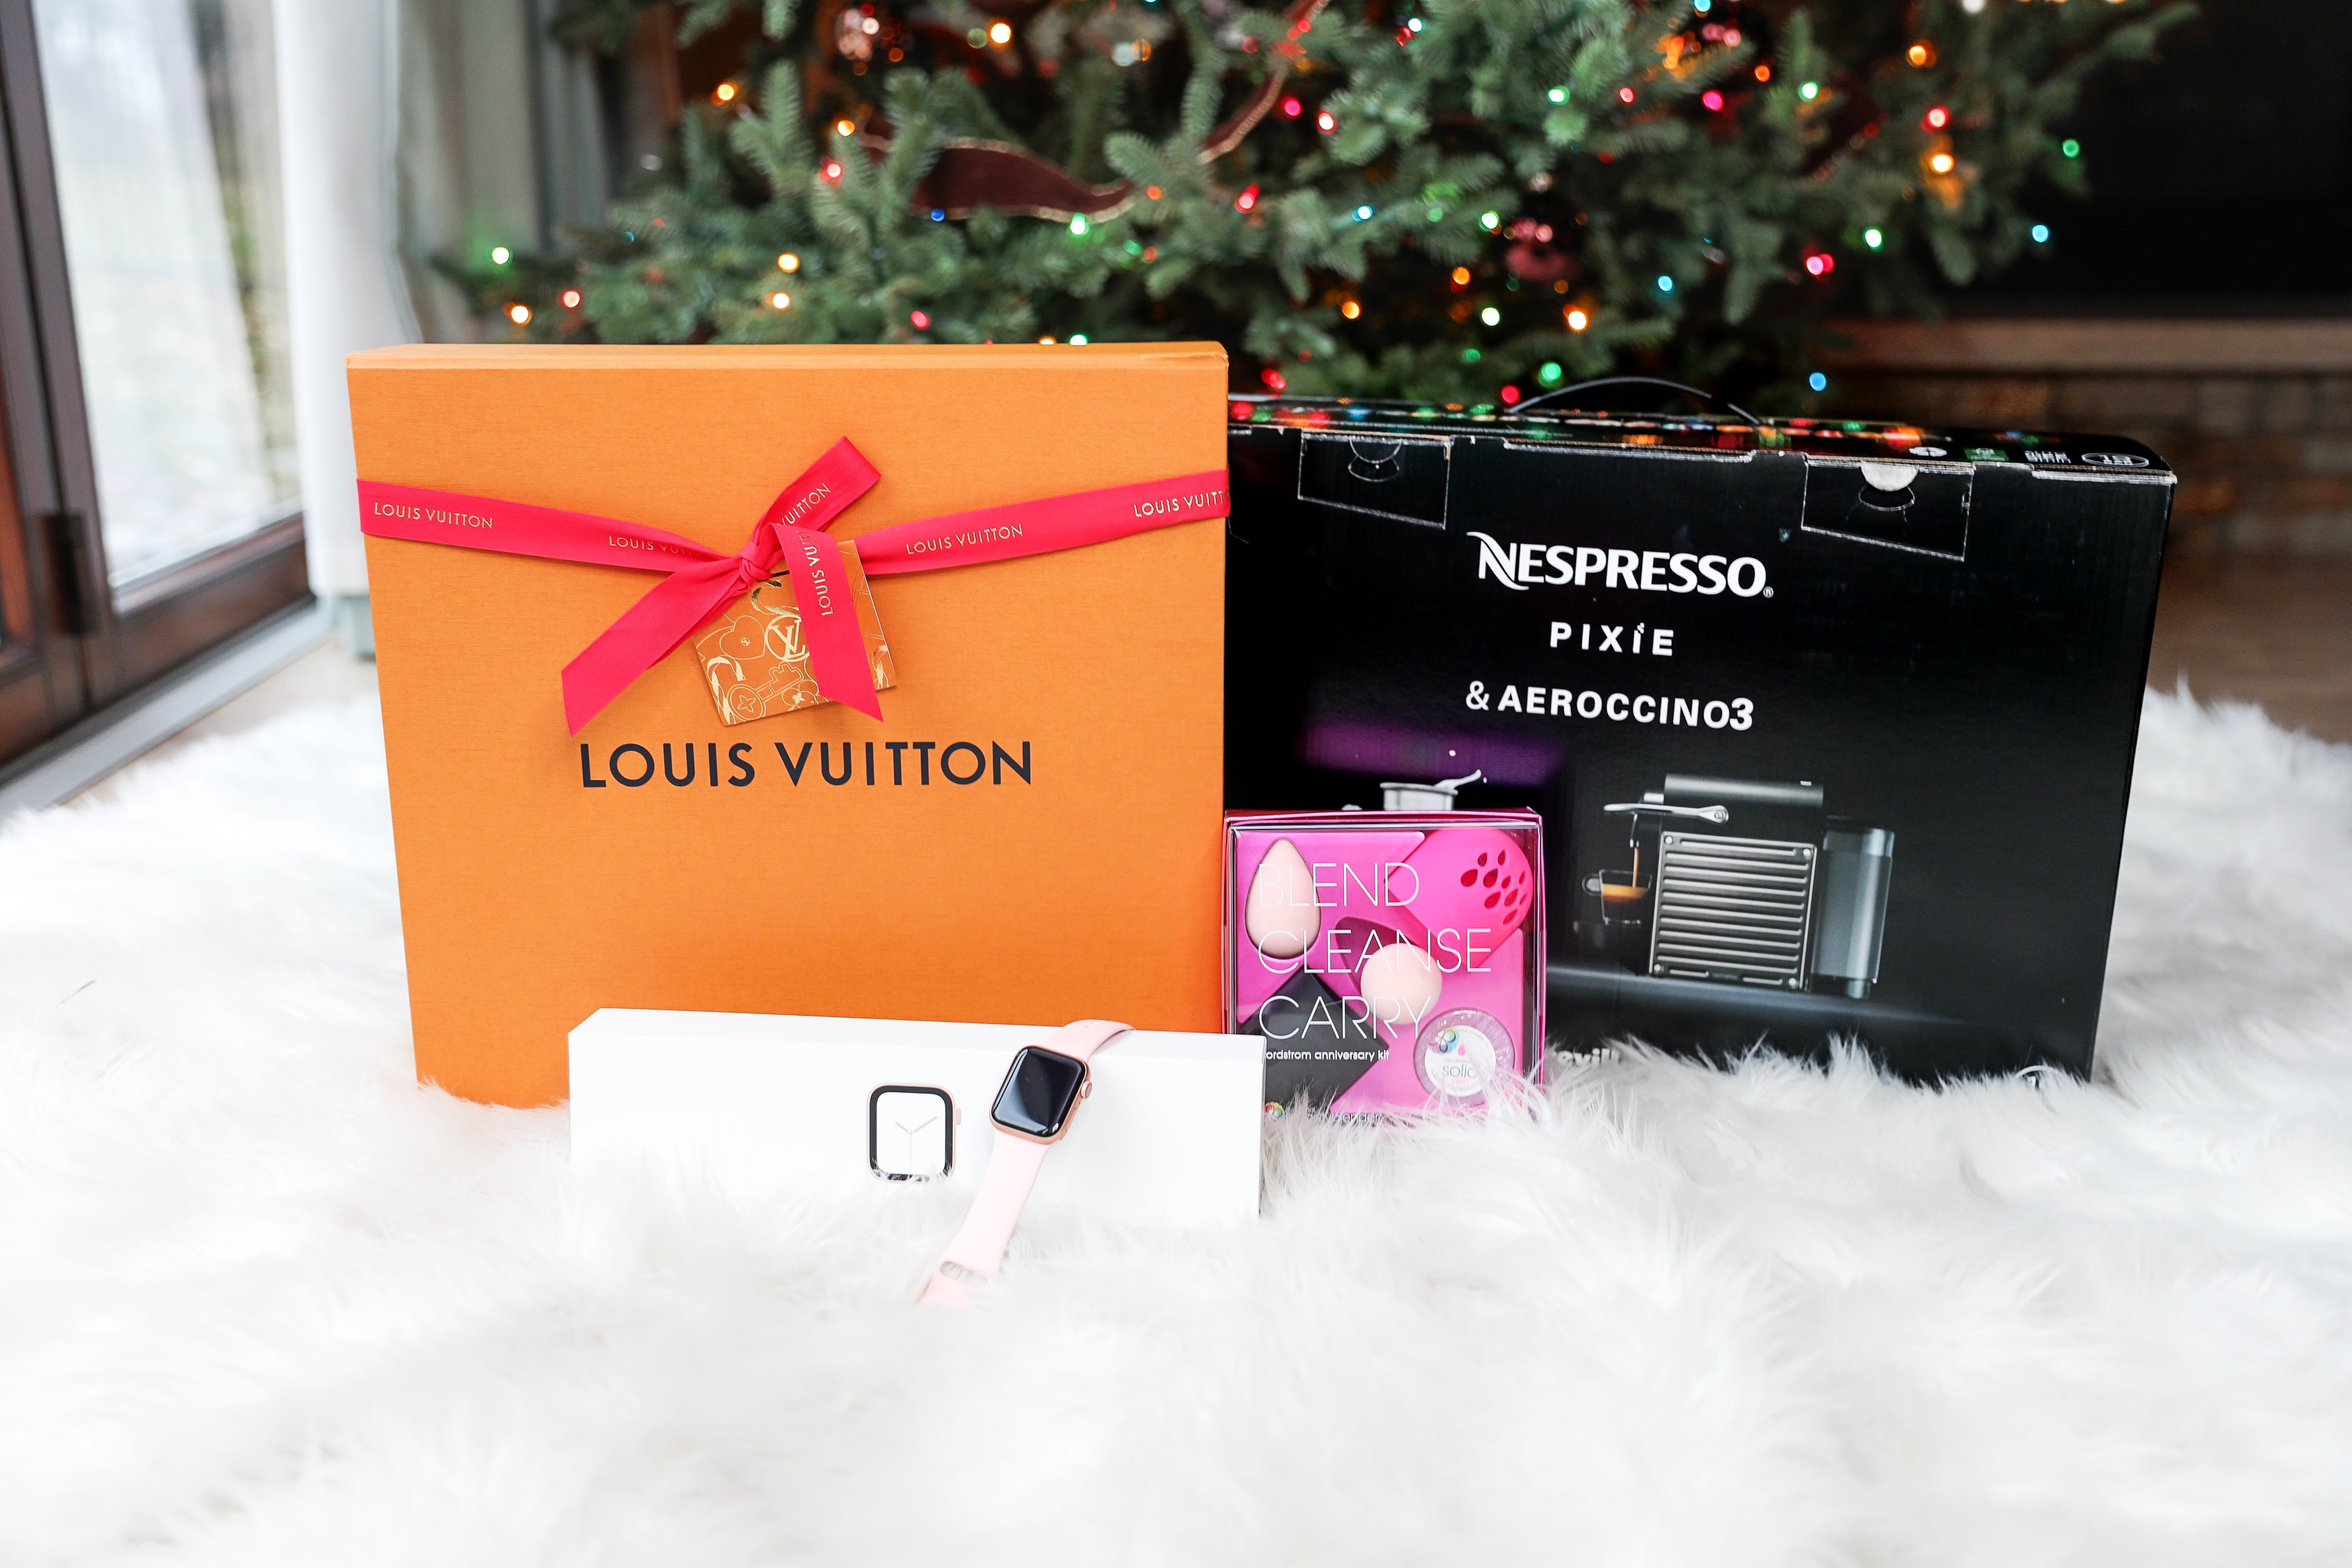 What I got for Christmas 2018! HUGE haul including a Louis Vuitton Neverfull MM, Apple Watch, Nespresso, and more! Details on fashion blog daily dose of charm by lauren lindmark